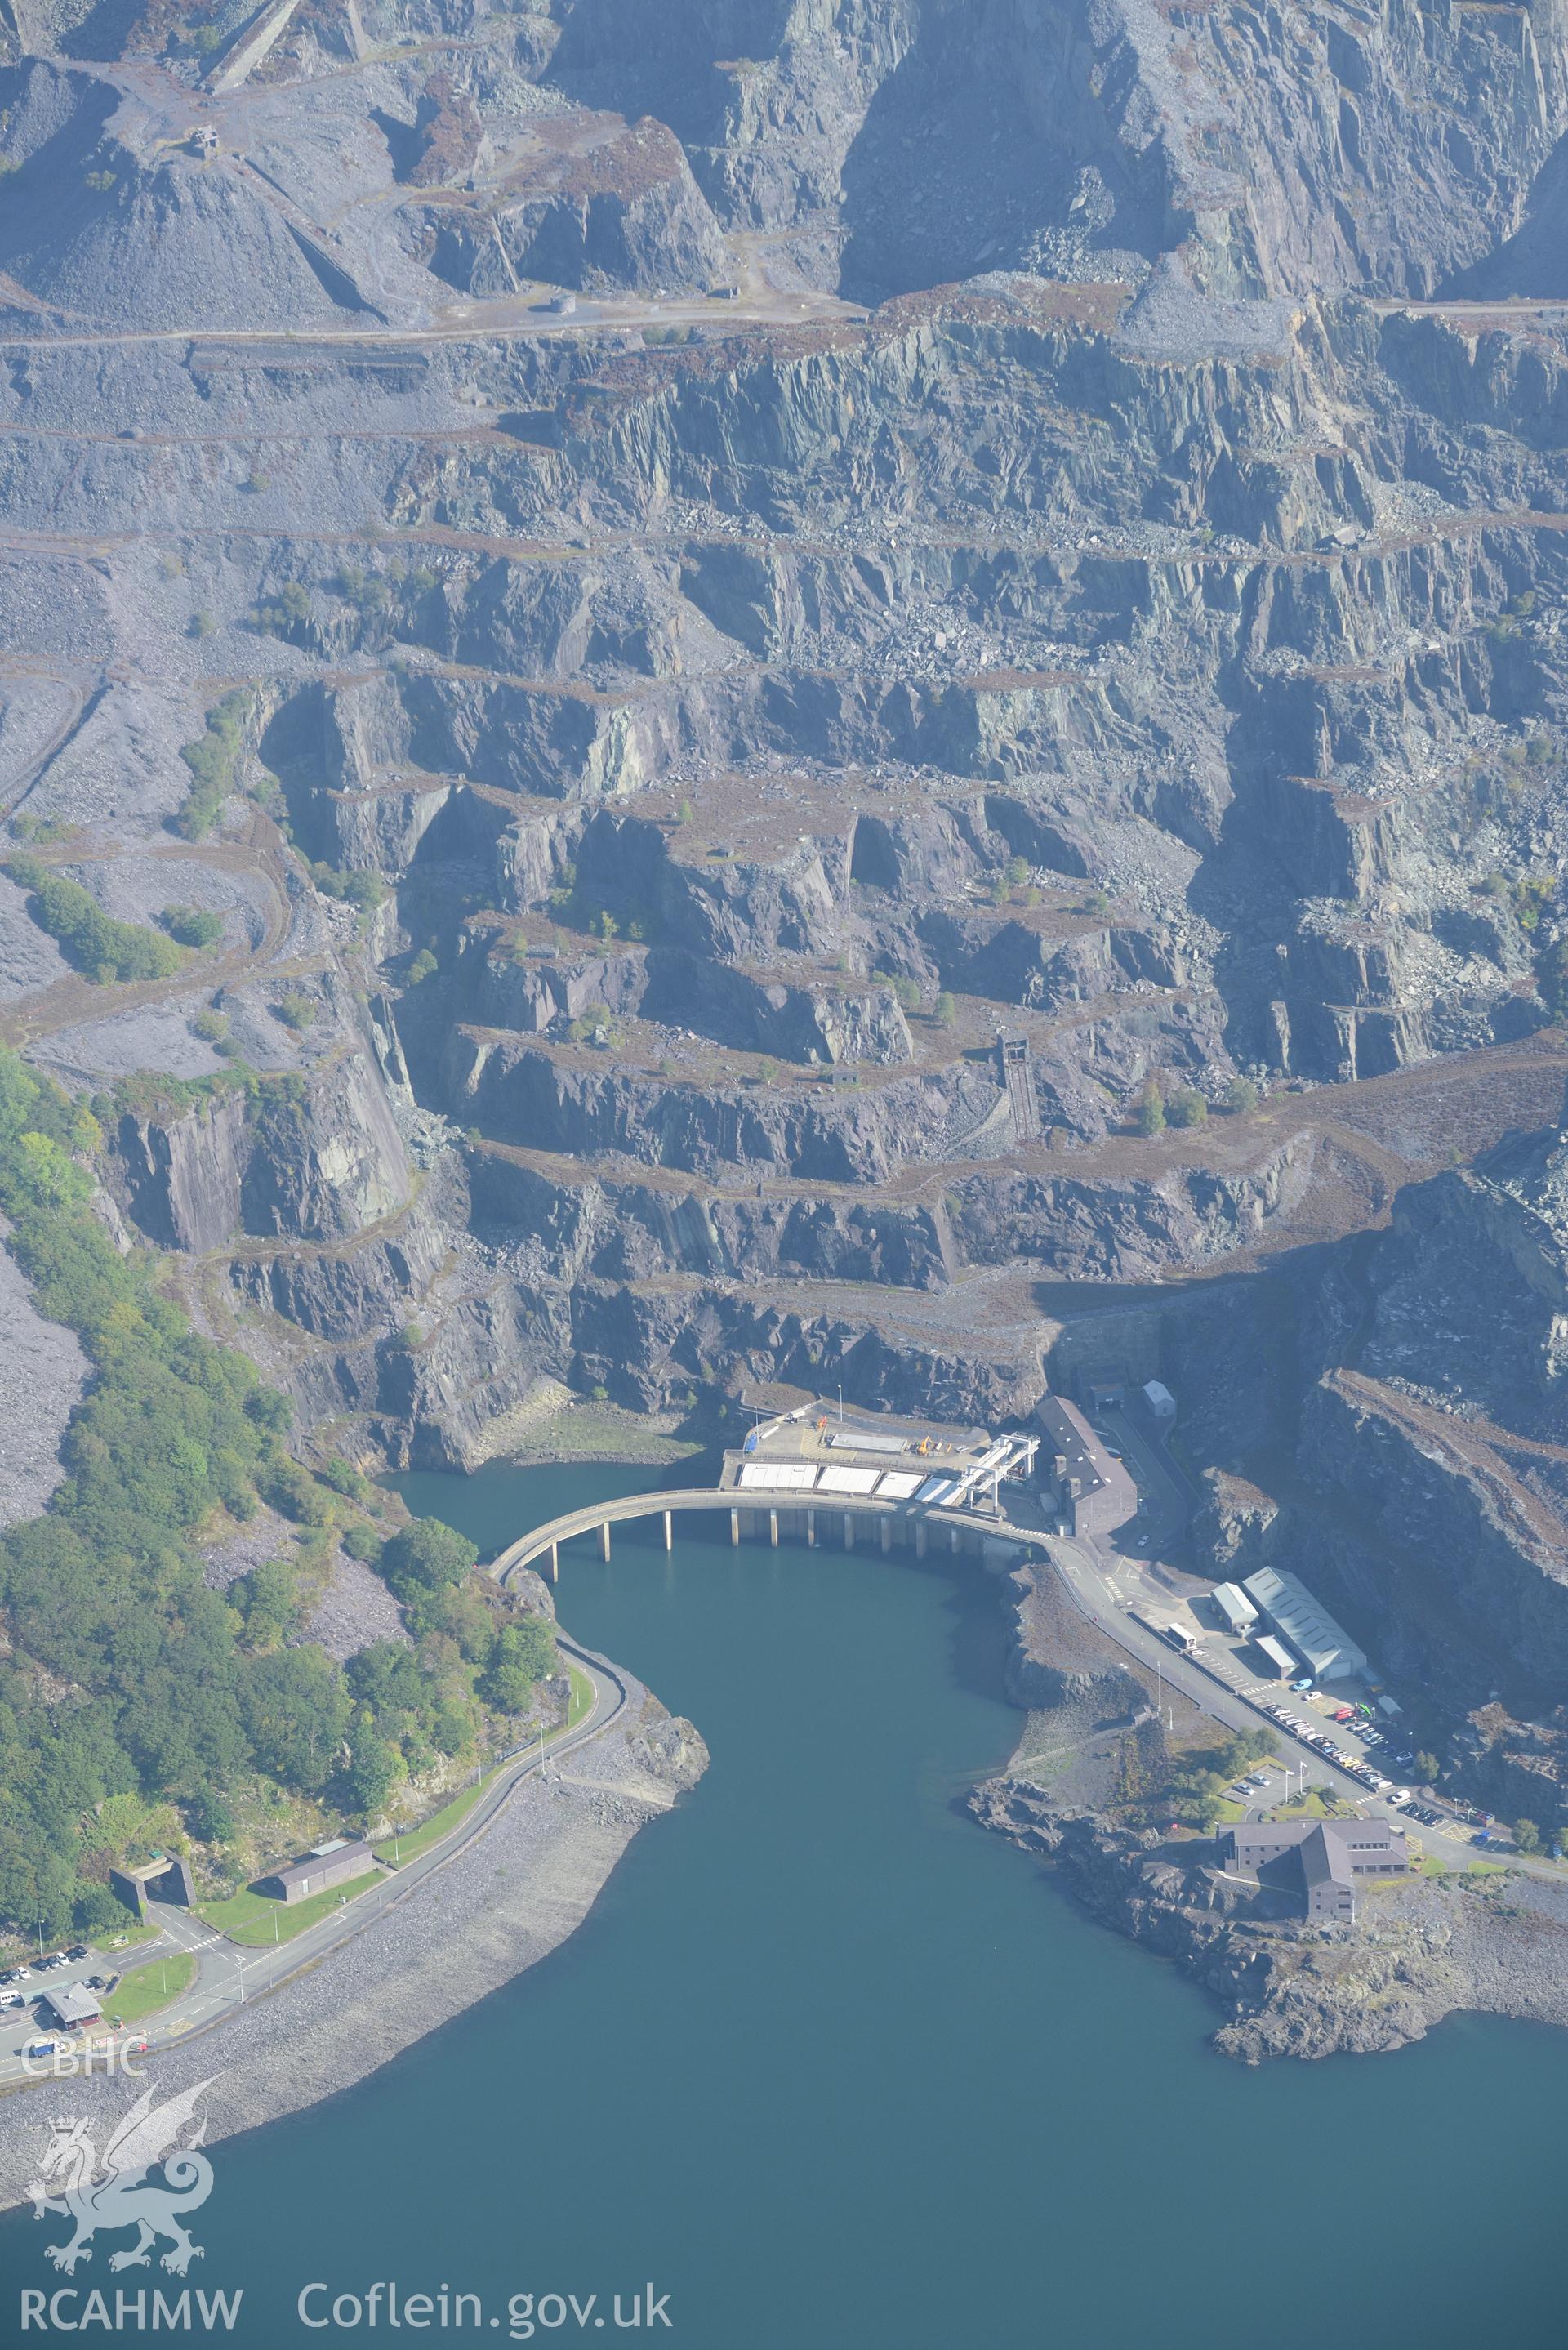 Dinorwic slate quarry; Dinorwig hydro-electric power station (Electric Mountain) and Llyn Peris reservoir, Llanberis. Oblique aerial photograph taken during the Royal Commission's programme of archaeological aerial reconnaissance by Toby Driver on 2nd October 2015.